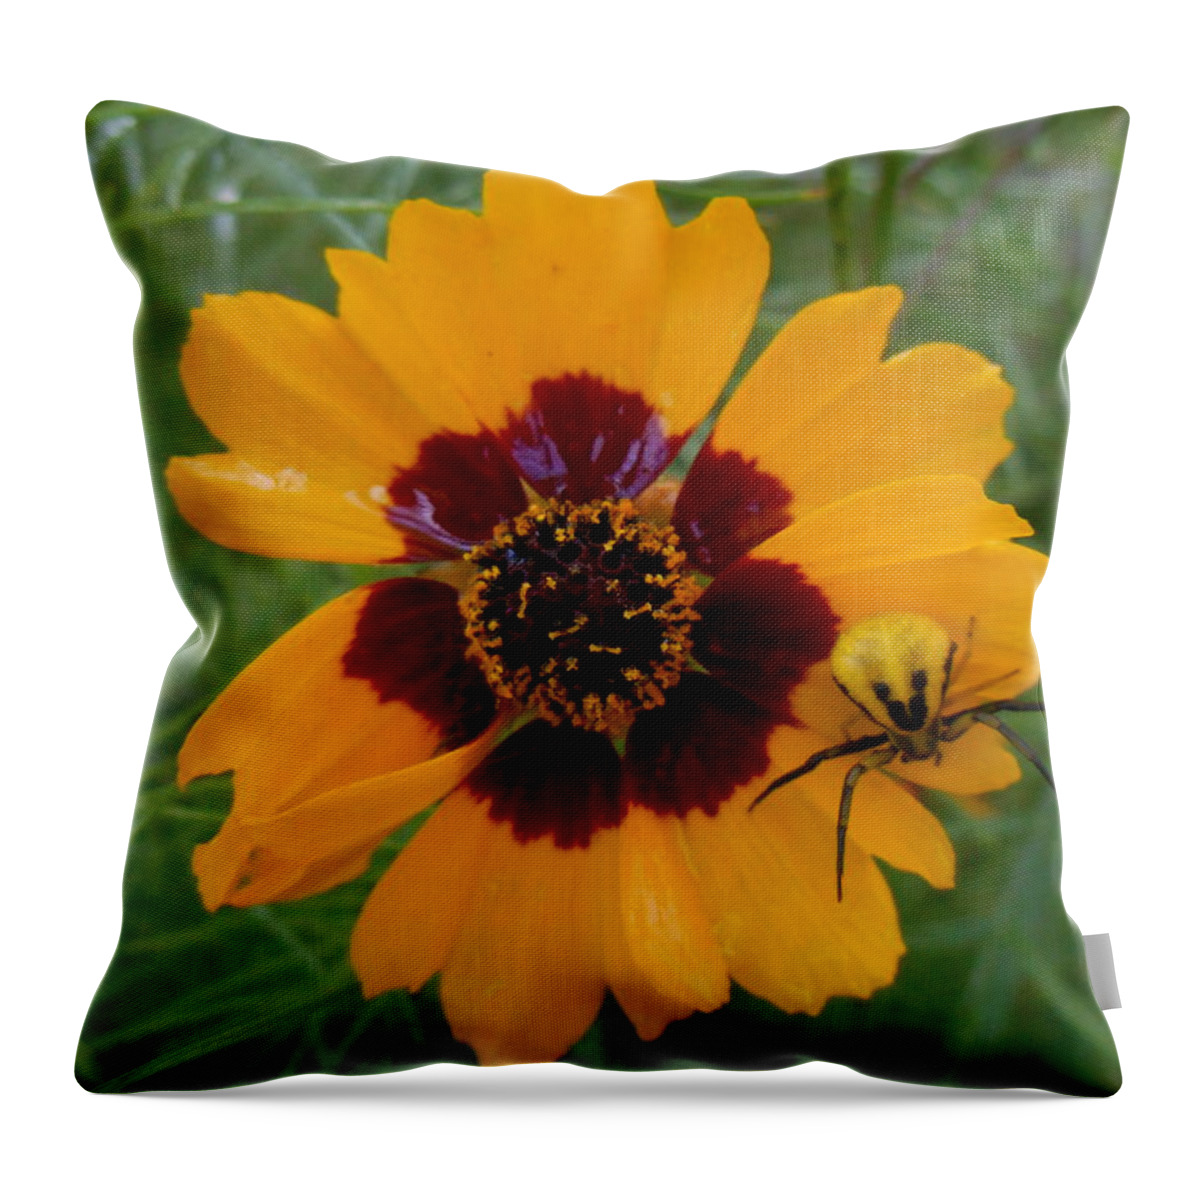 Spider Throw Pillow featuring the photograph Itsy Bitsy Spider by Diannah Lynch